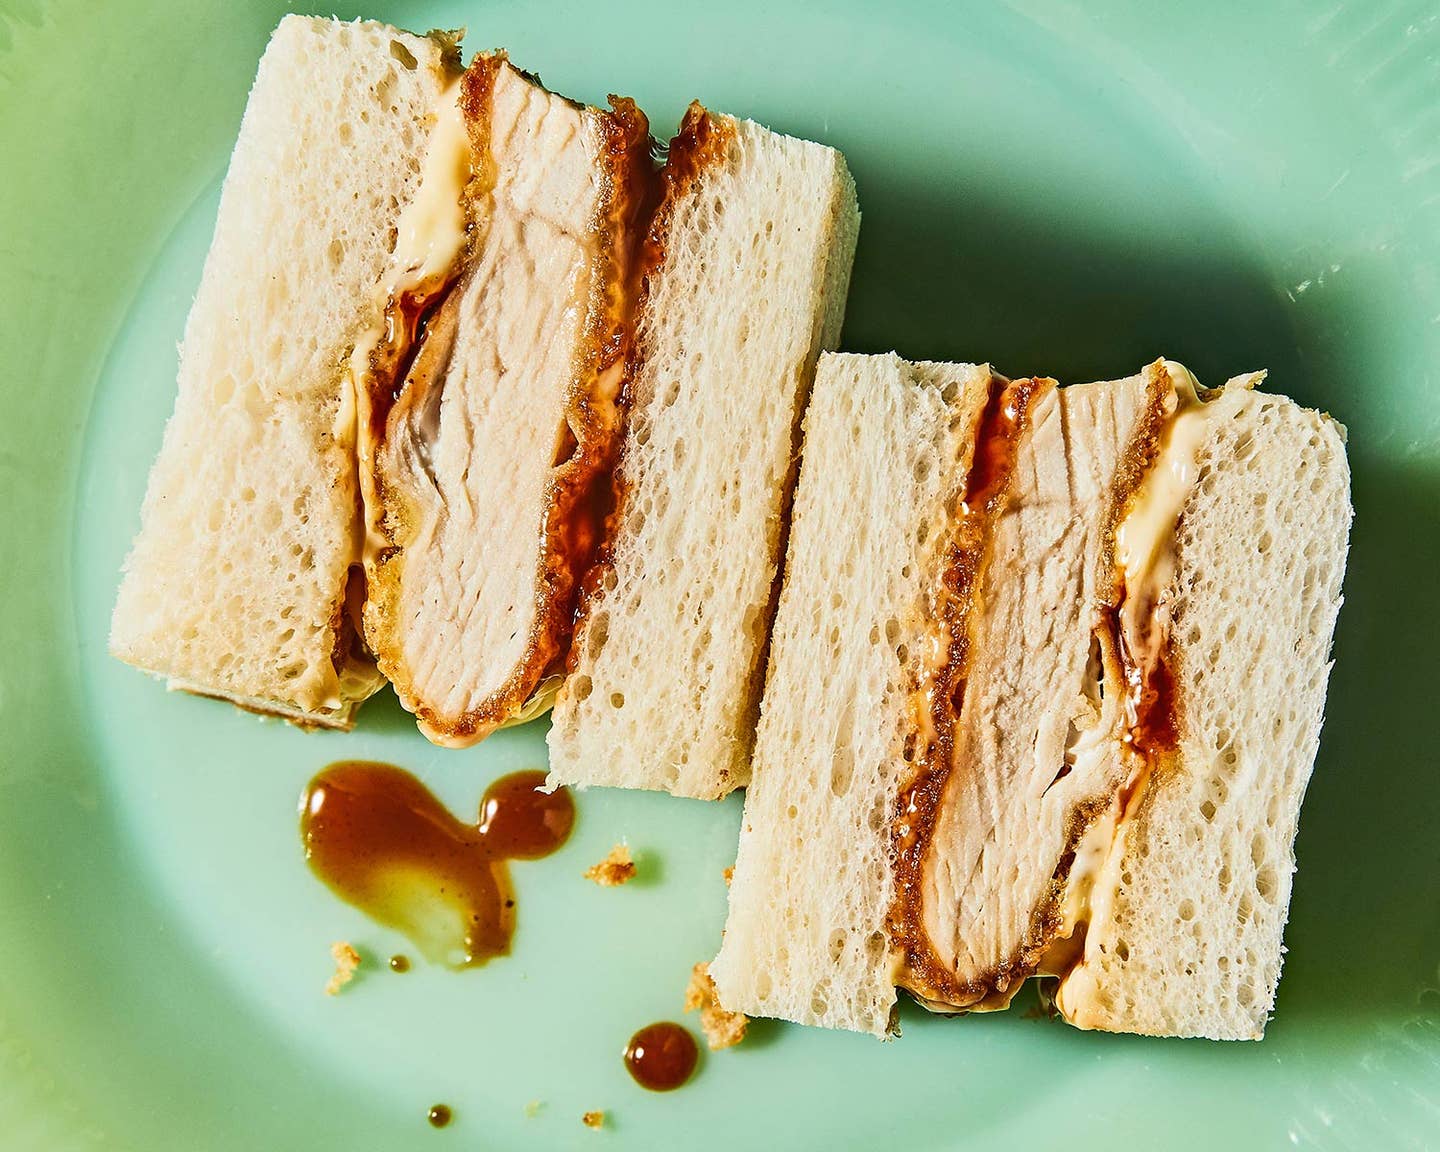 You Only Need These 4 Things to Make Killer Katsu Sandwiches at Home